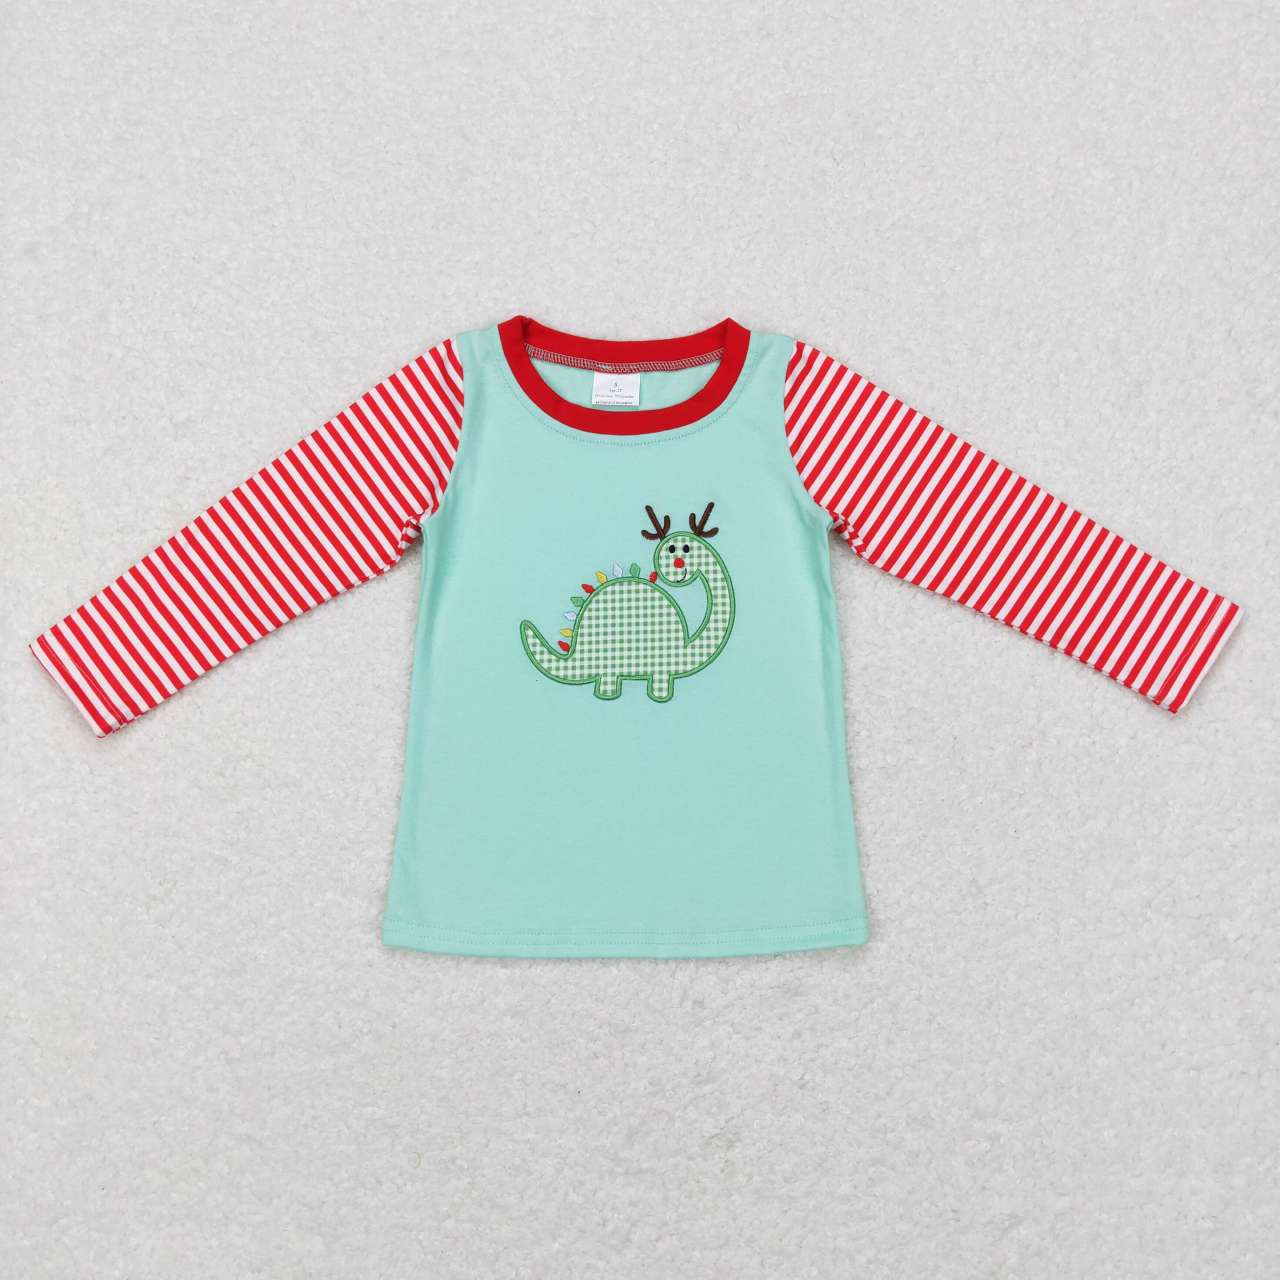 BT0422 Embroidered dinosaur red and white striped raglan green long-sleeved top